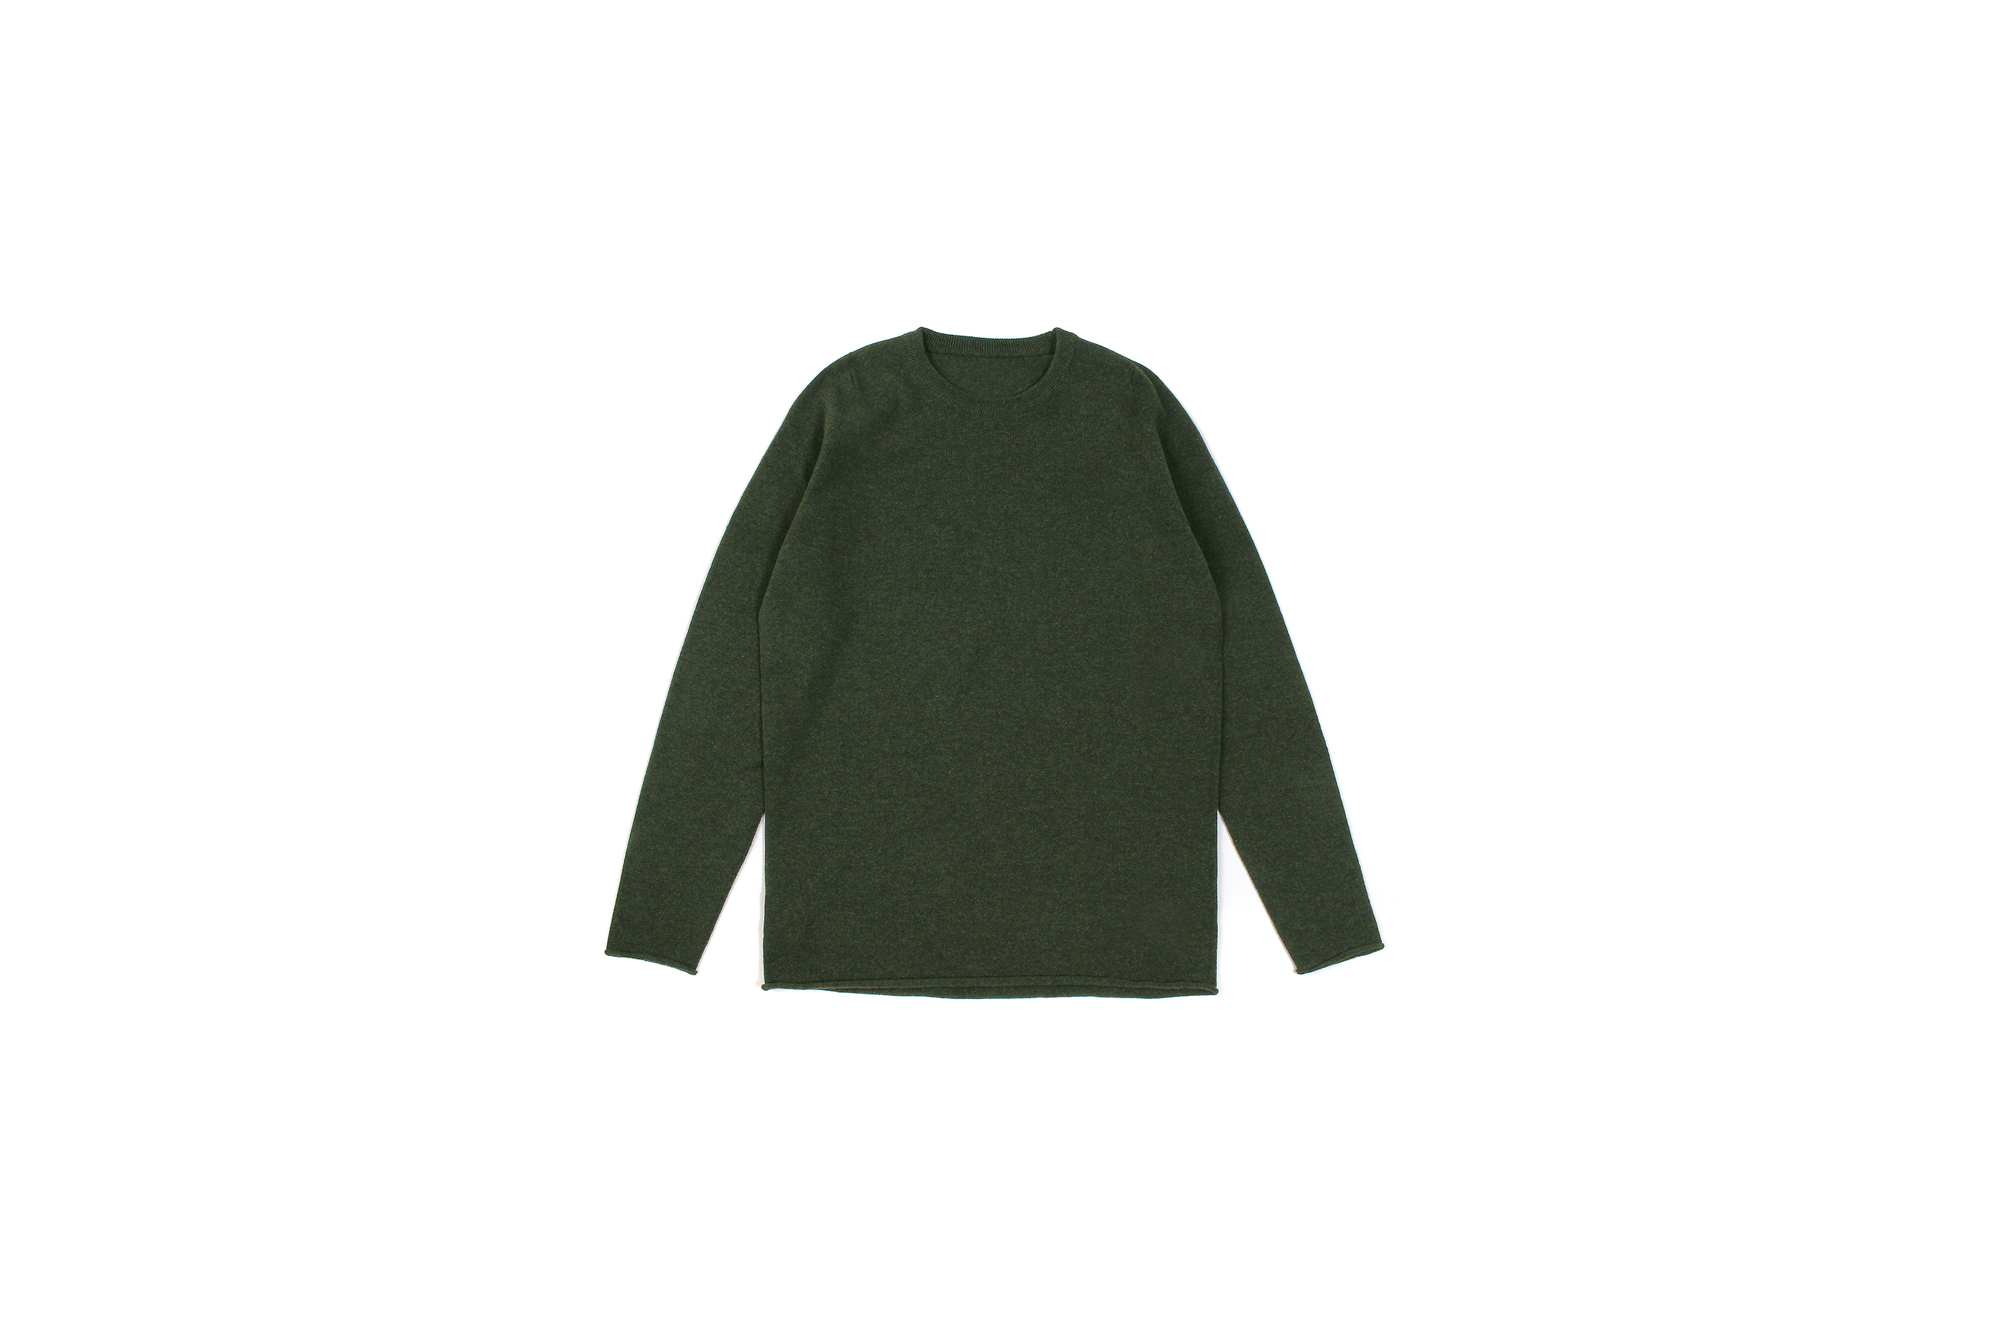 lucien pellat-finet(ルシアン ペラフィネ) Cashmere Crew Neck Sweater カシミア クルーネック セーター LODEN (オリーブ) made in